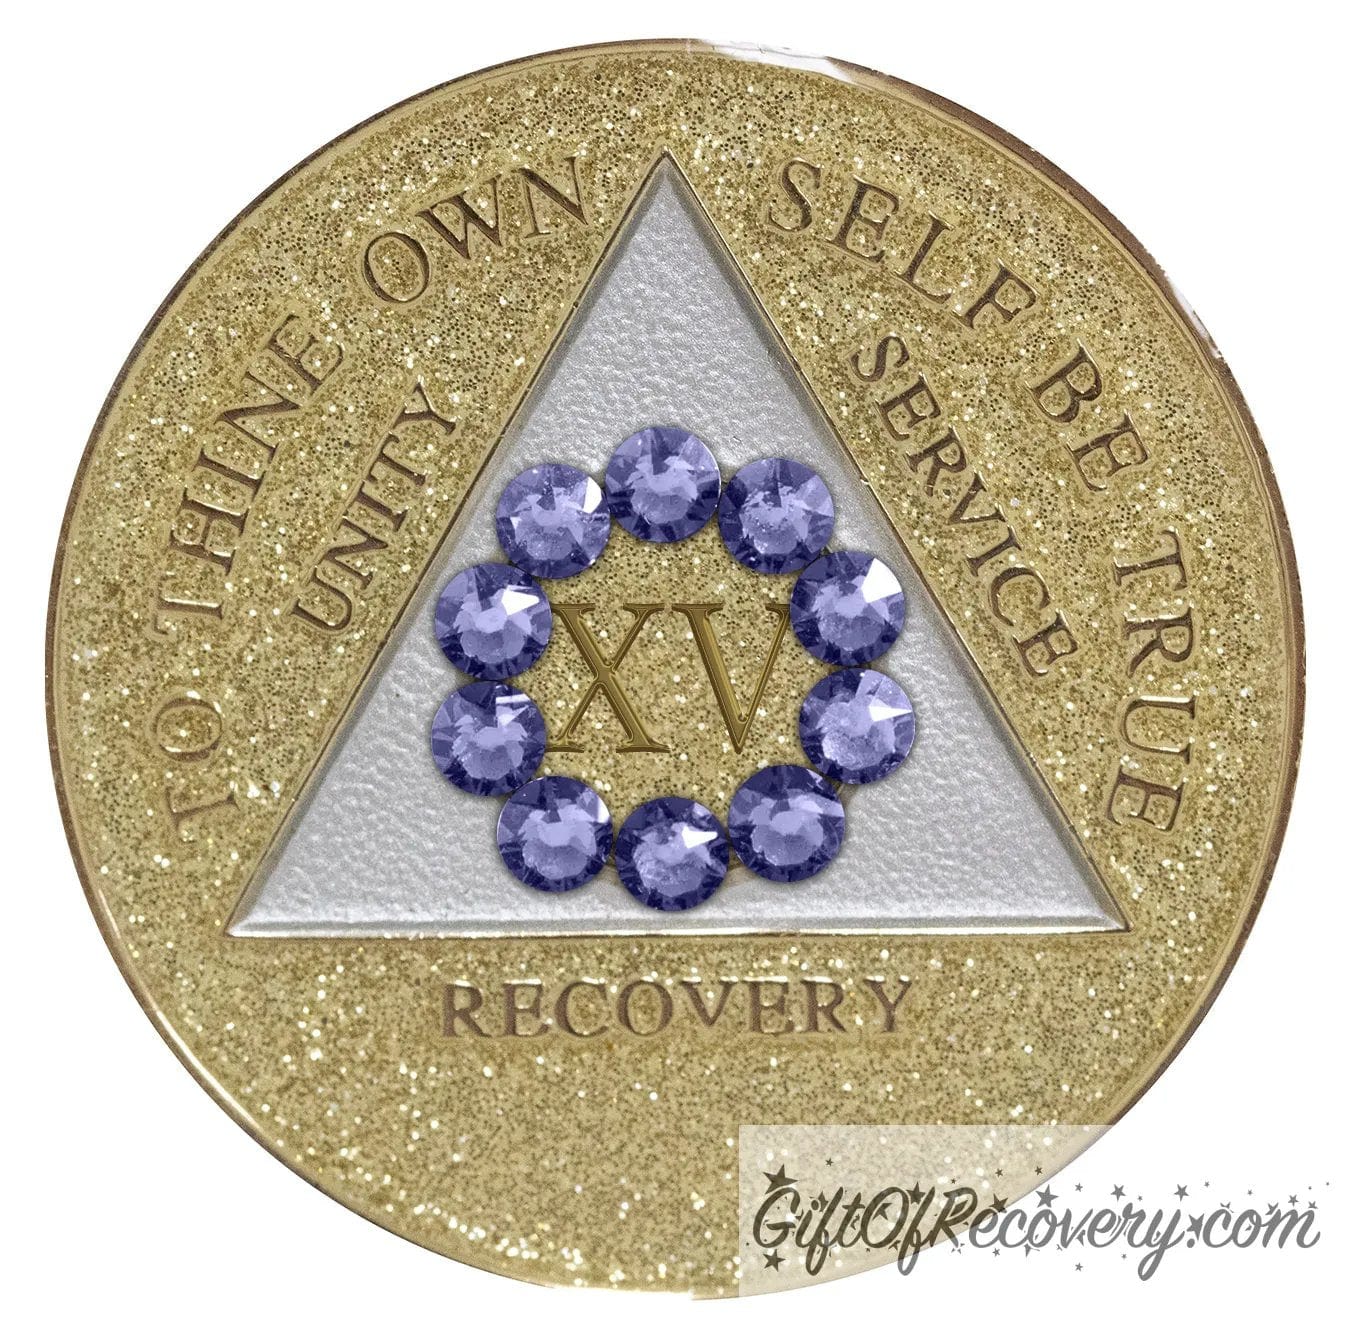 15 year AA medallion gold glitter with ten genuine purple crystal in the shape of a circle around the roman numeral to symbolize our common welfare and personal recovery, and the triangle soft silver, to thine own self be true, unity, service. recovery are embossed with 14k gold-plated brass the recovery medallion is sealed with resin for a scratch free shiny finish.